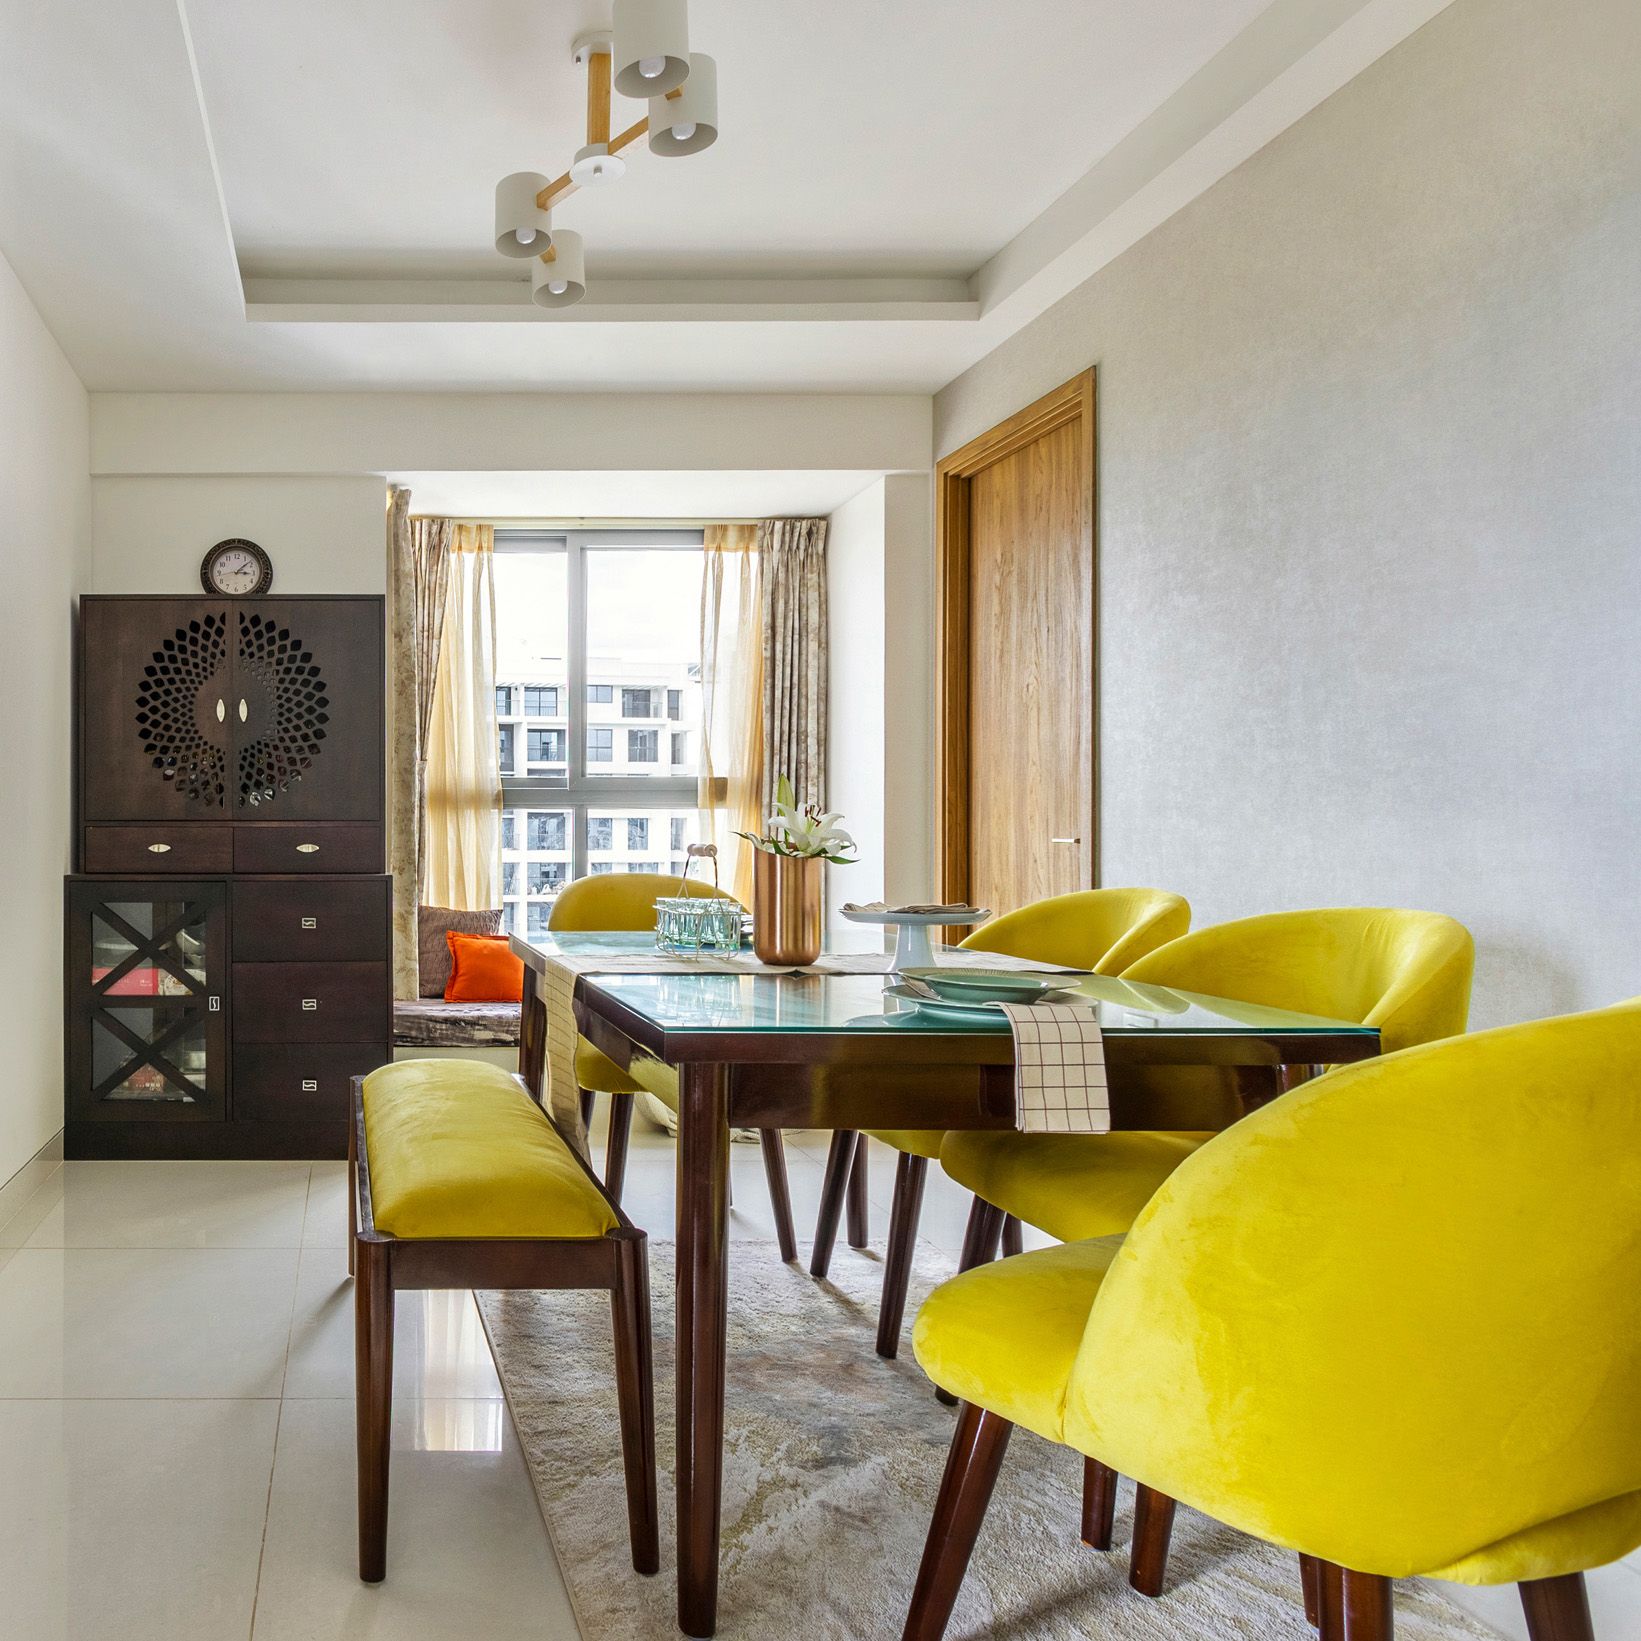 Modern 2-BHK Flat Design In Bangalore With 4-Seater Yellow And Wood Dining Room Design